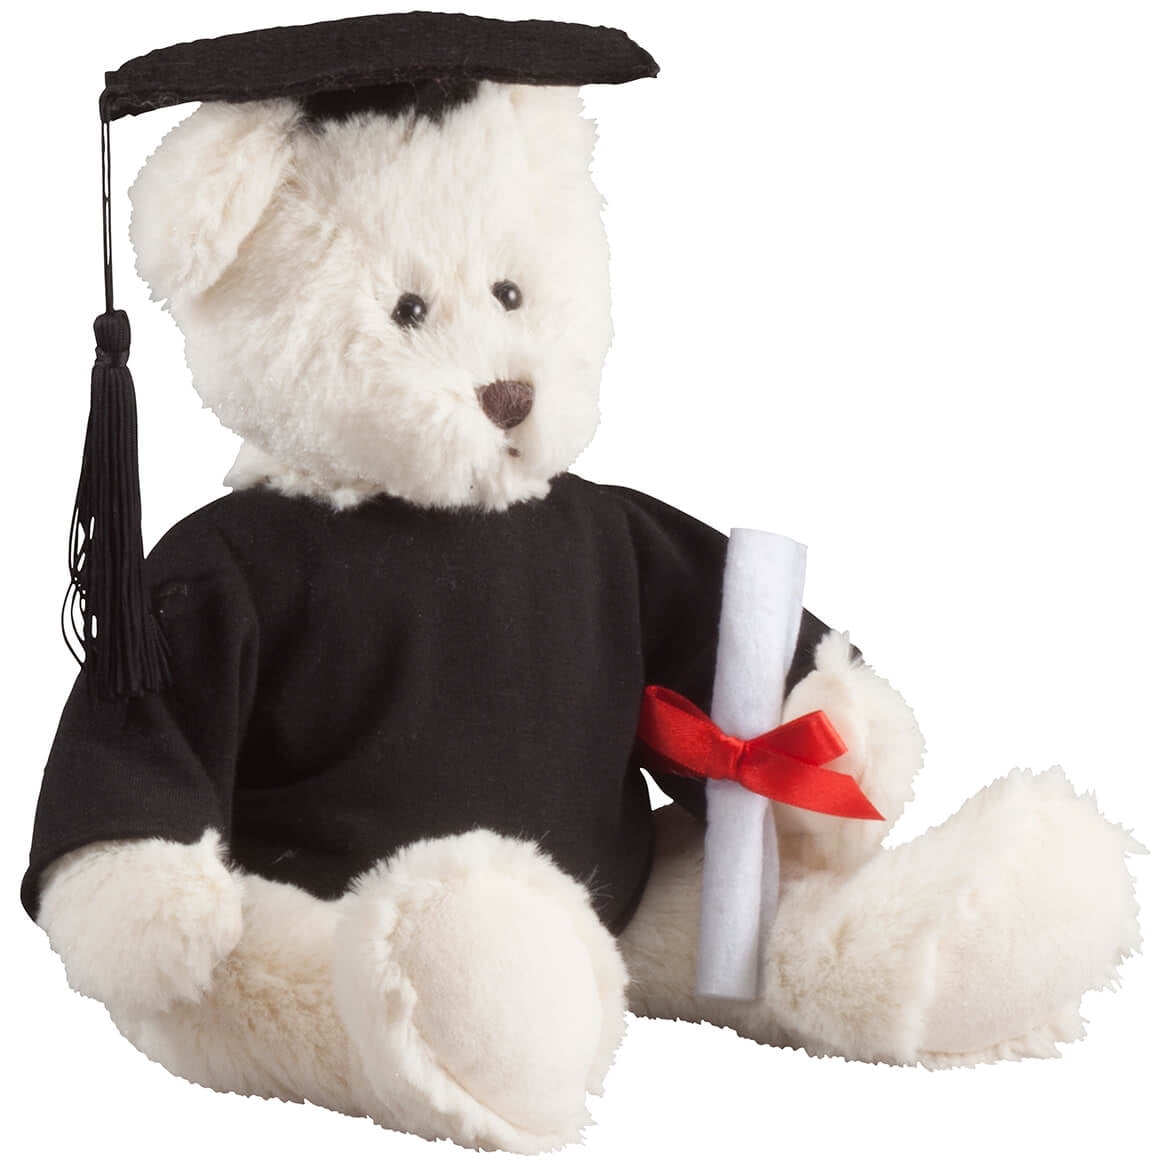 12 Pack Details about   Kicko Adorable Graduation Bear 4.5 Inch Academic Plush Bears in...